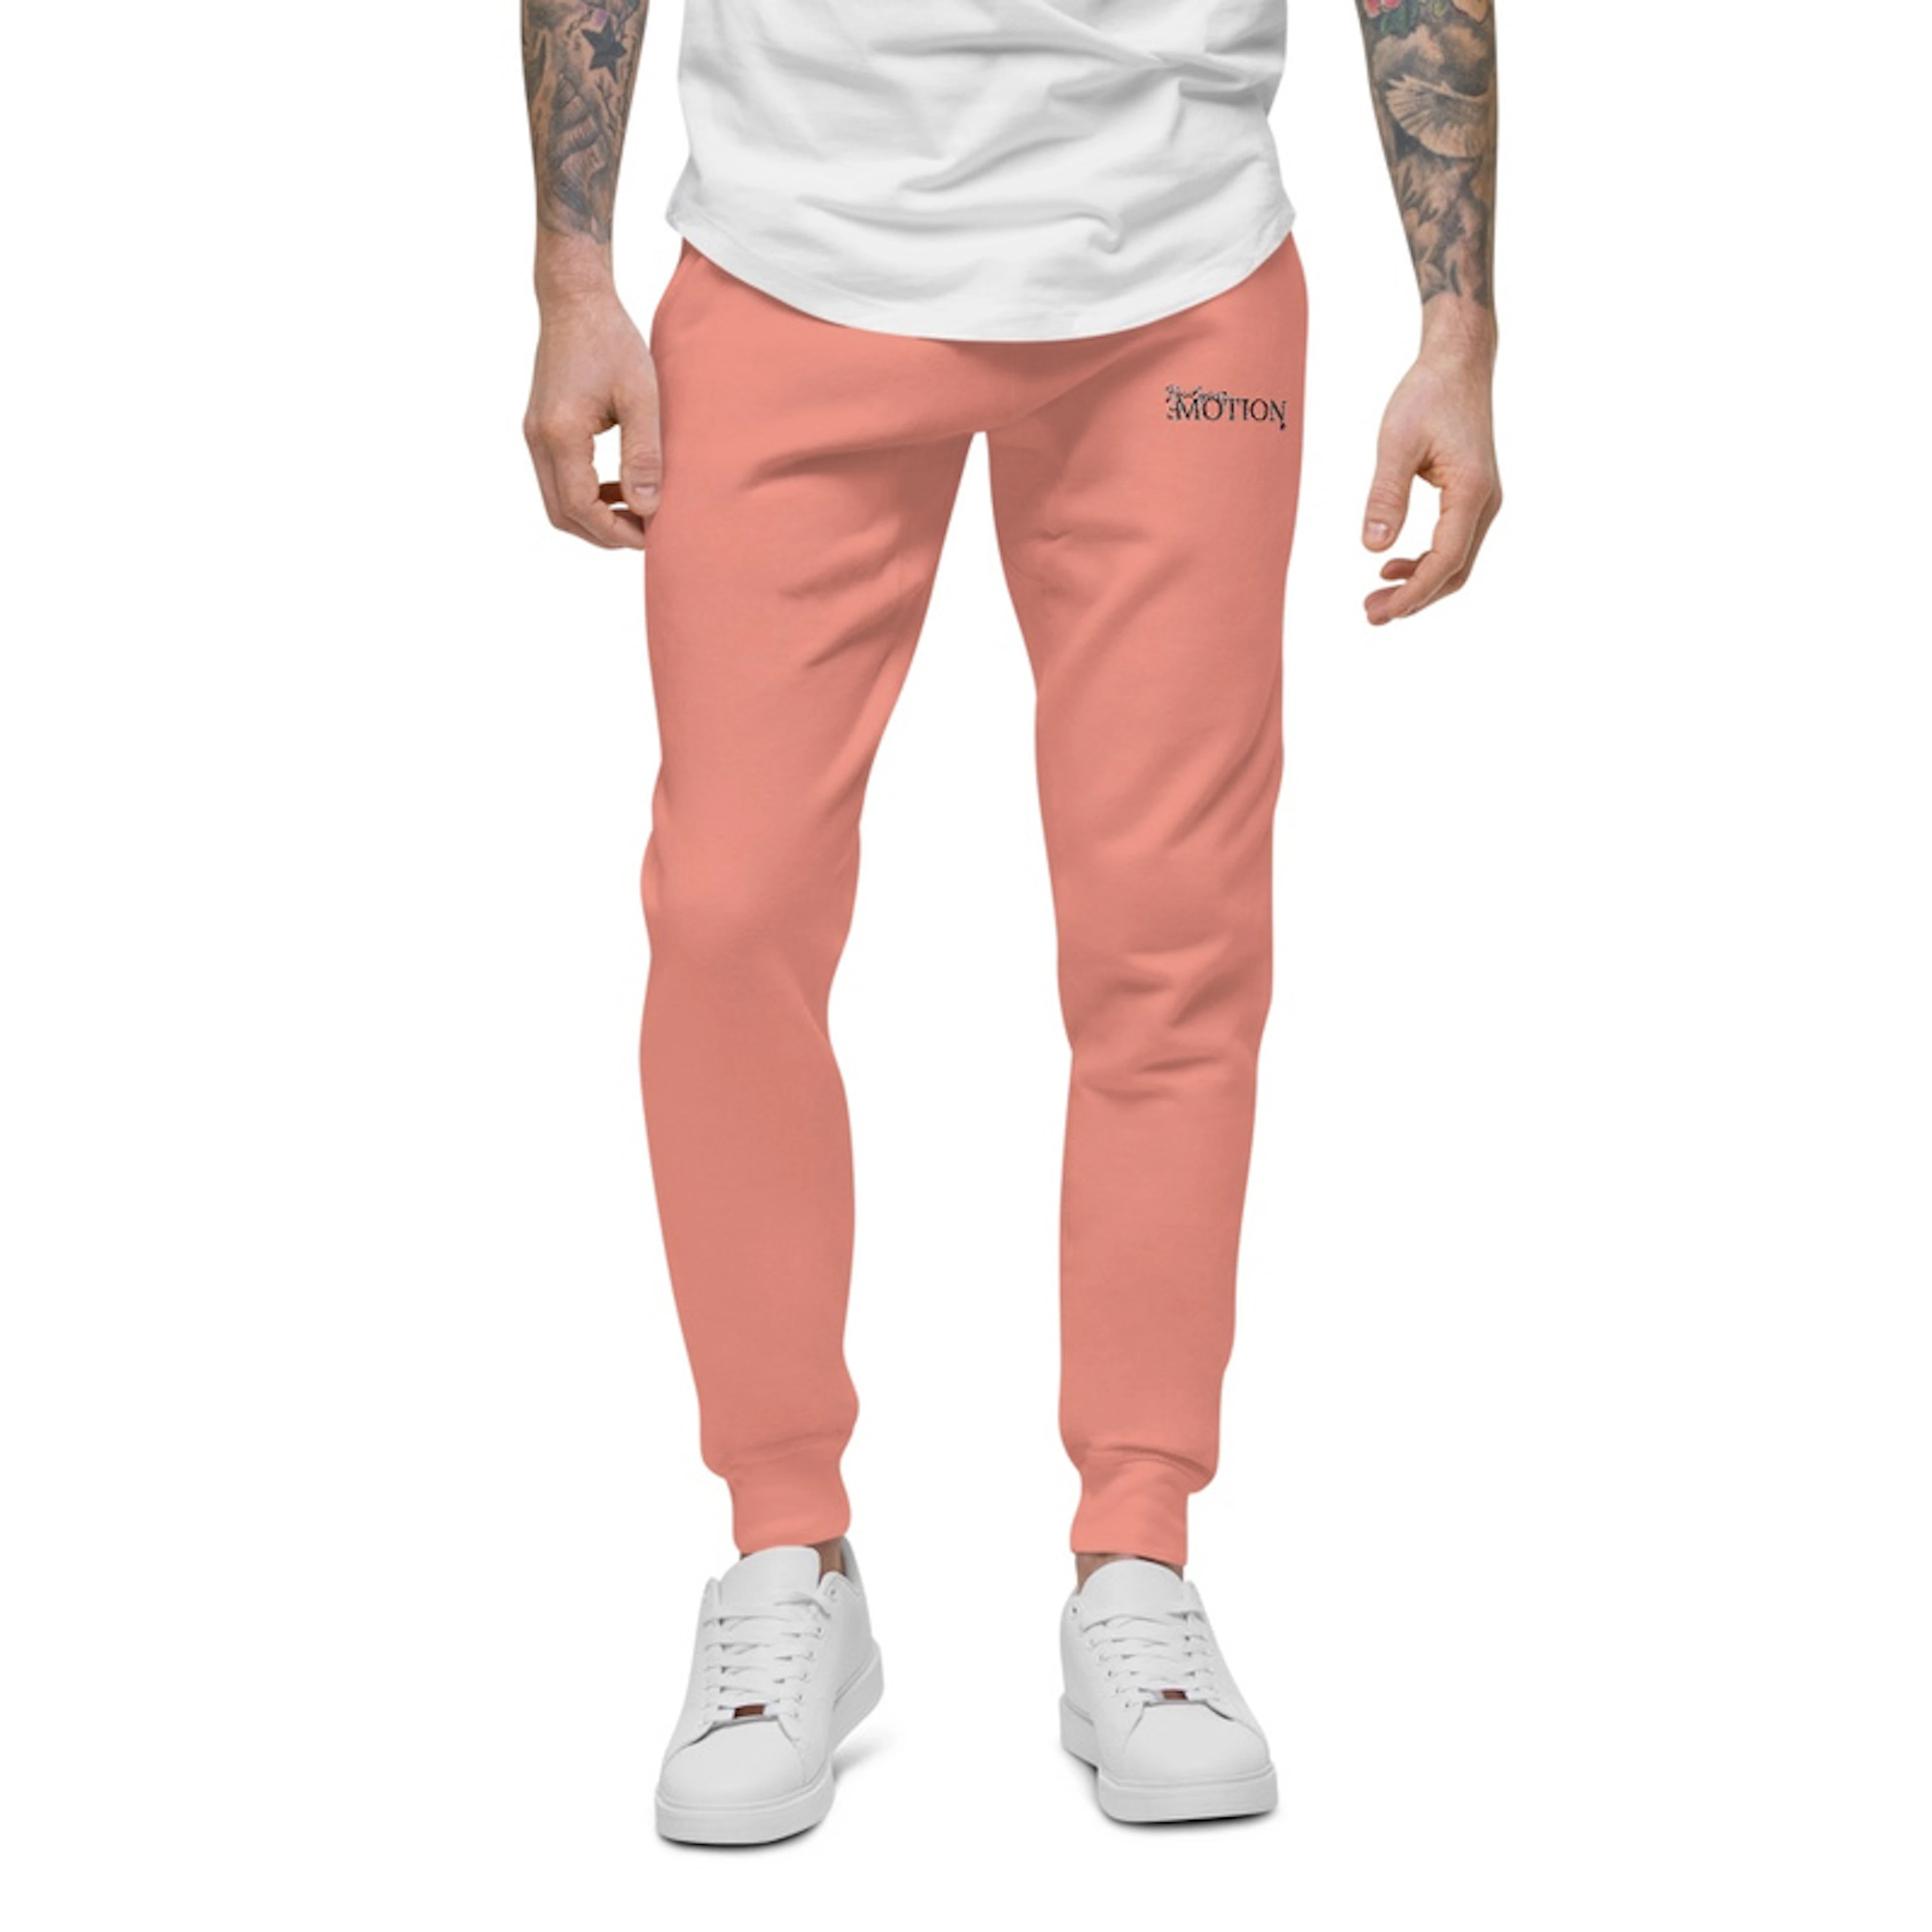 Find your motion Rose stitch joggers